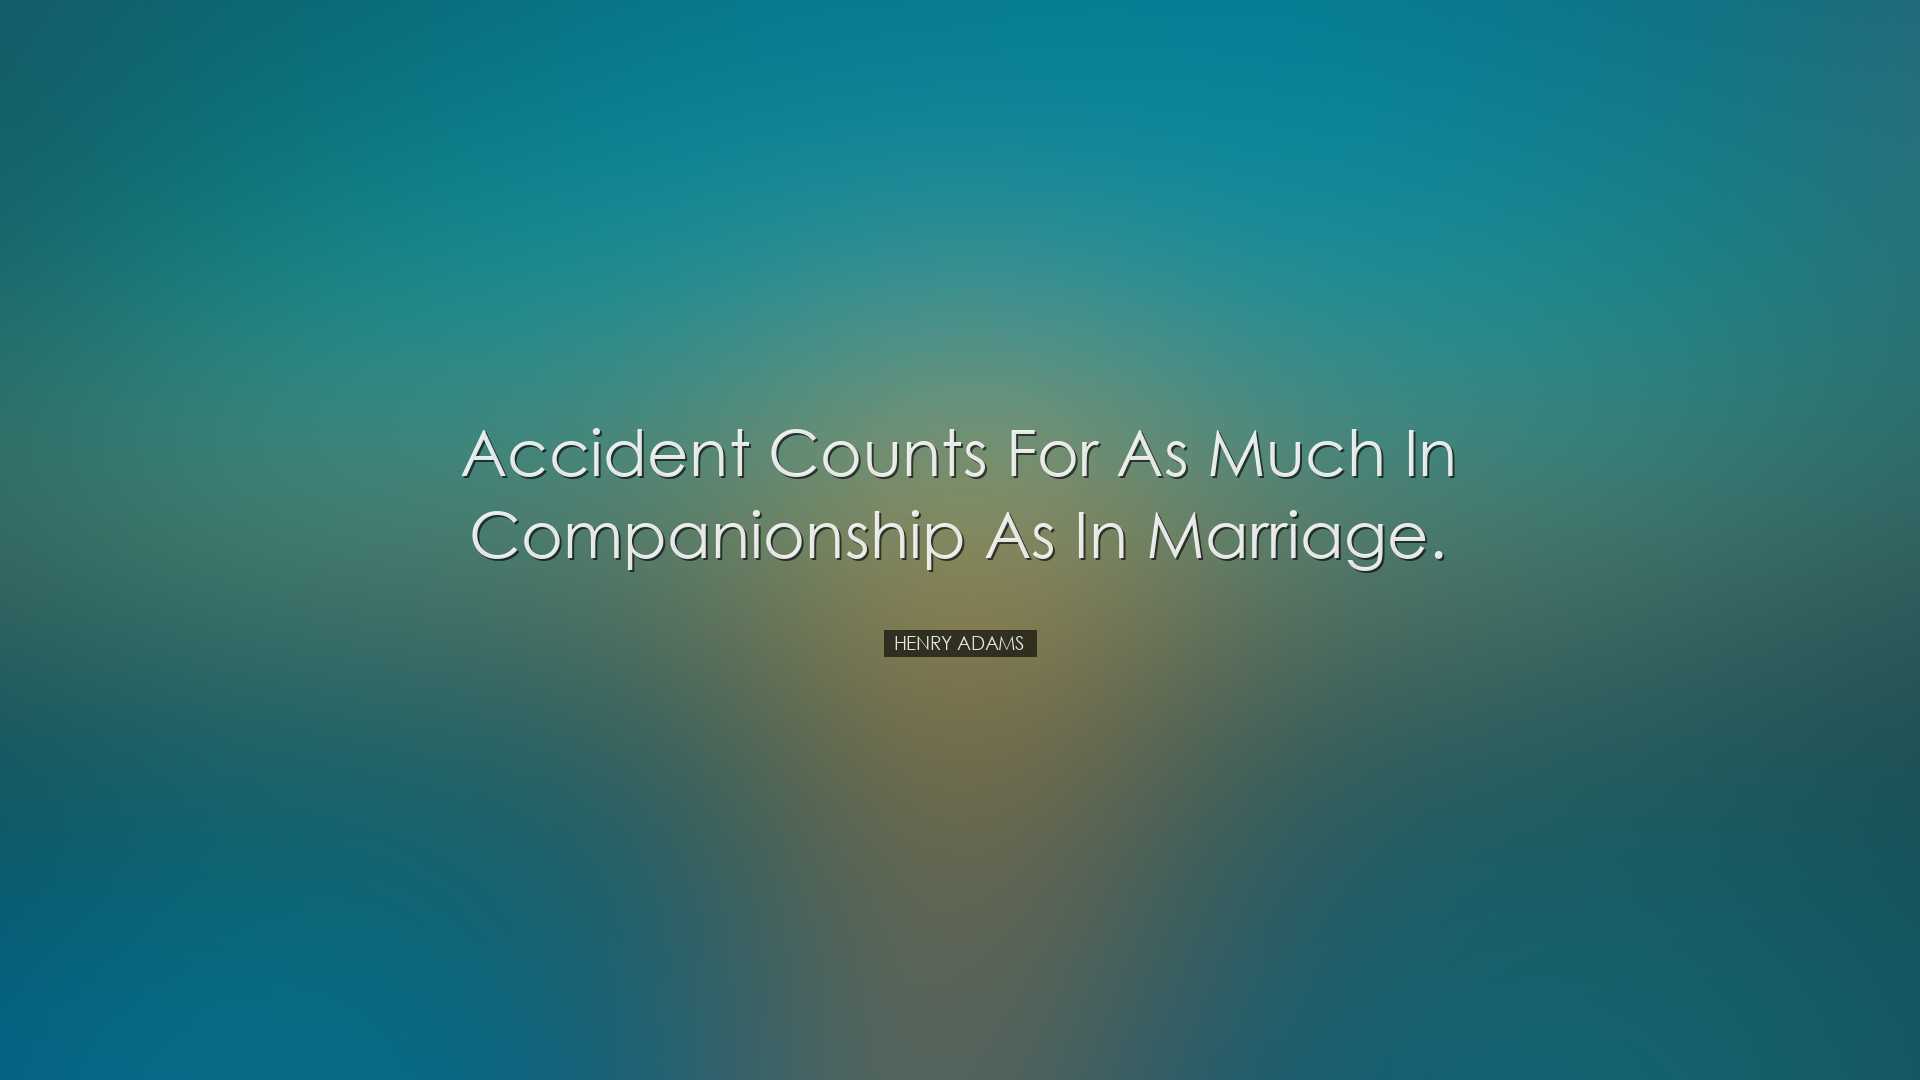 Accident counts for as much in companionship as in marriage. - Hen